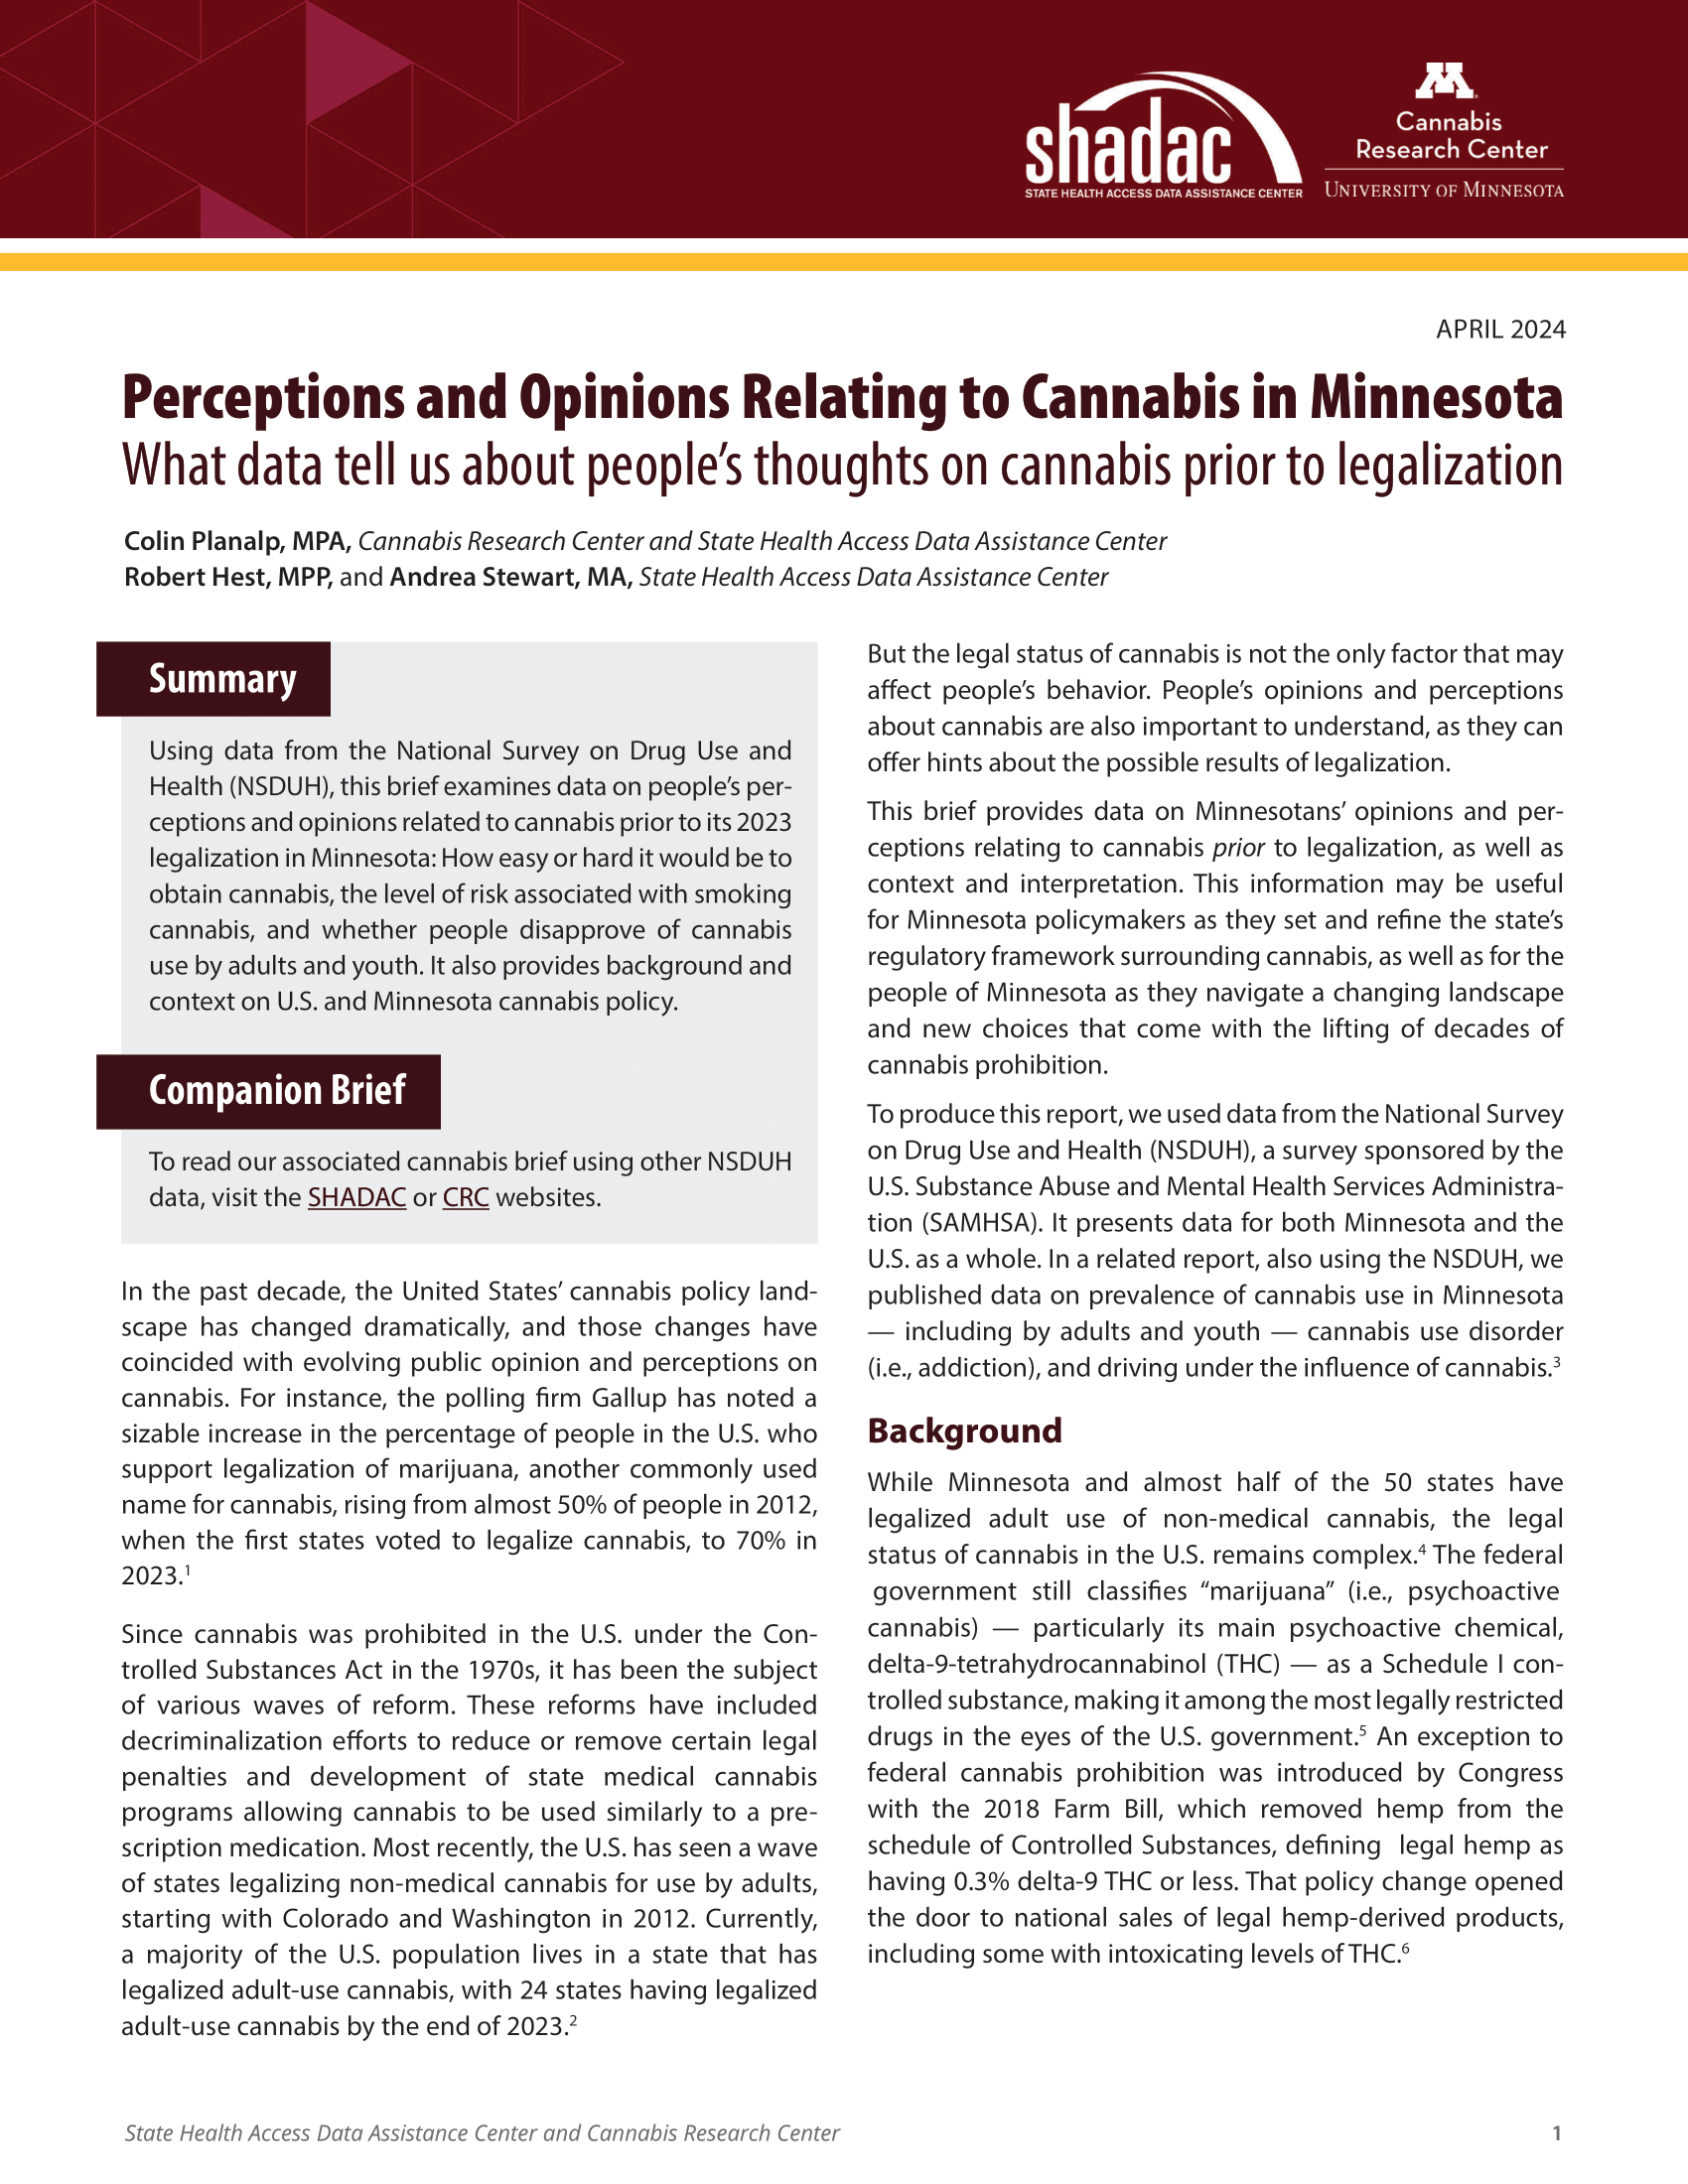 minnesota cannabis legalization opinions and perceptions cover page